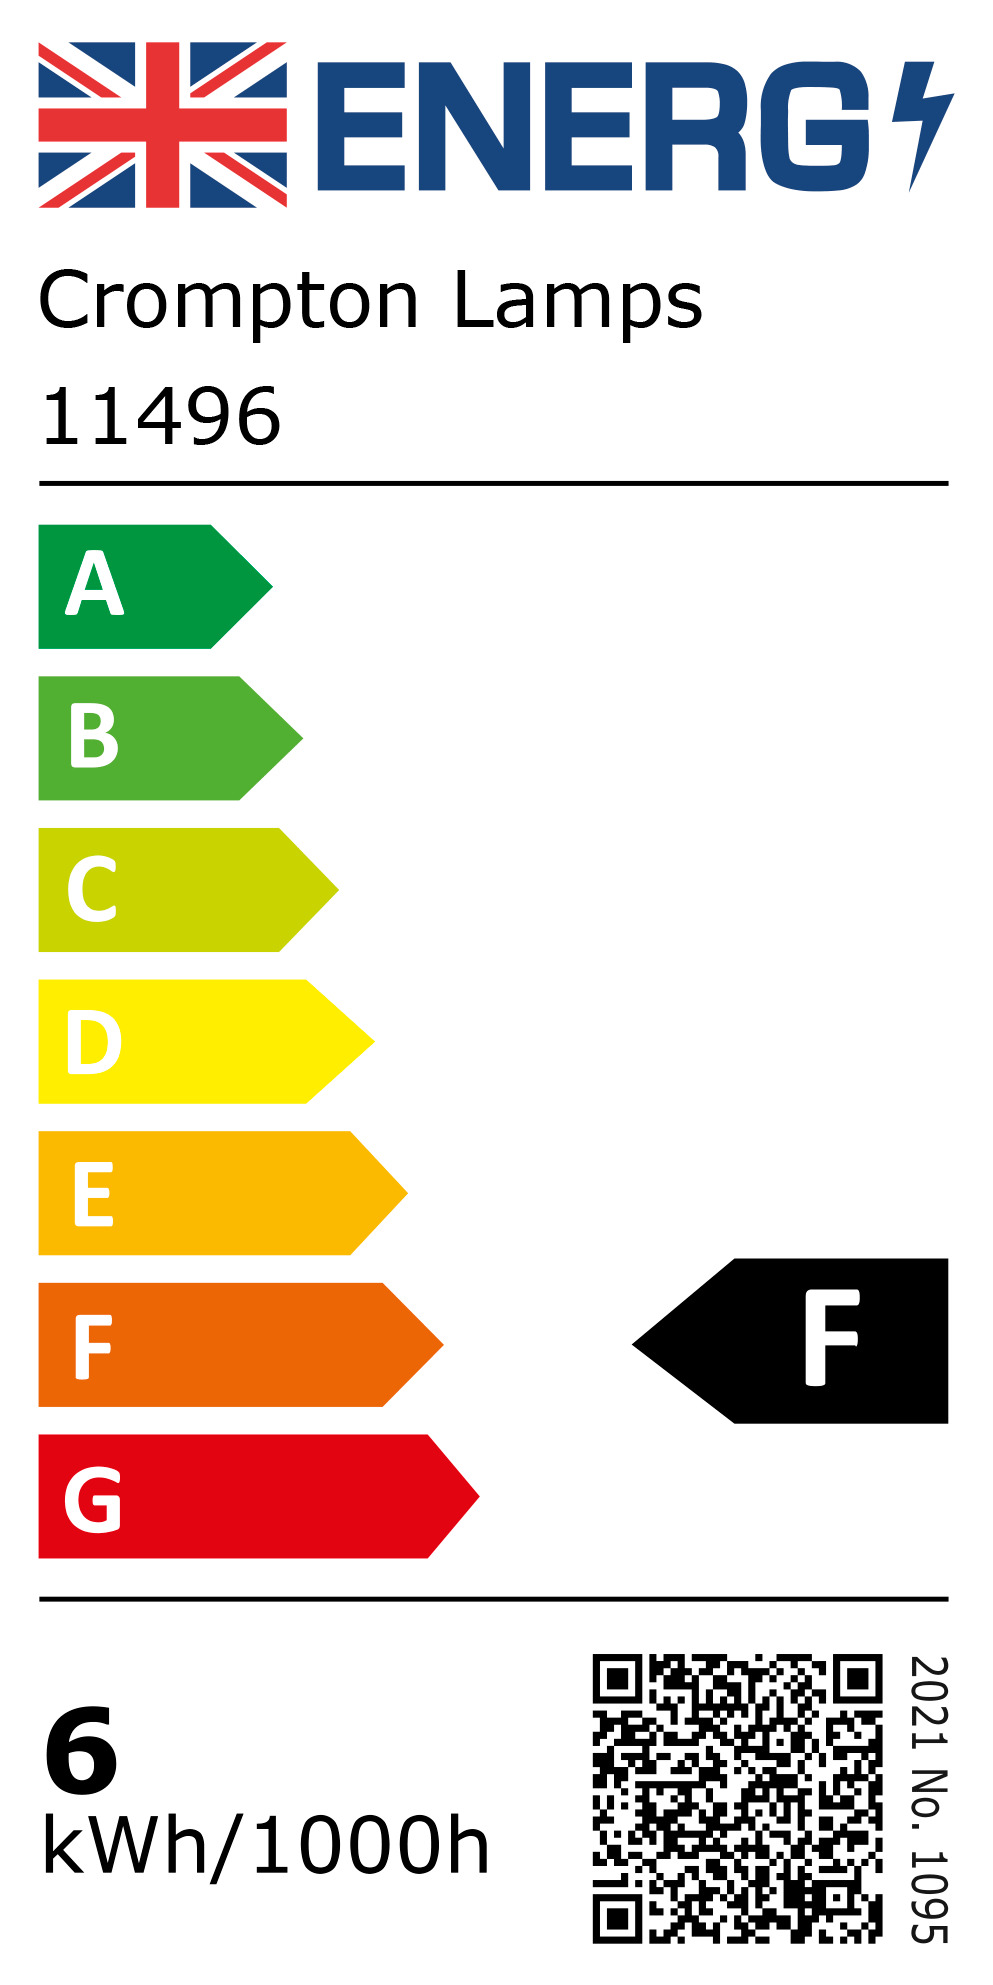 New 2021 Energy Rating Label: Stock Code 11496